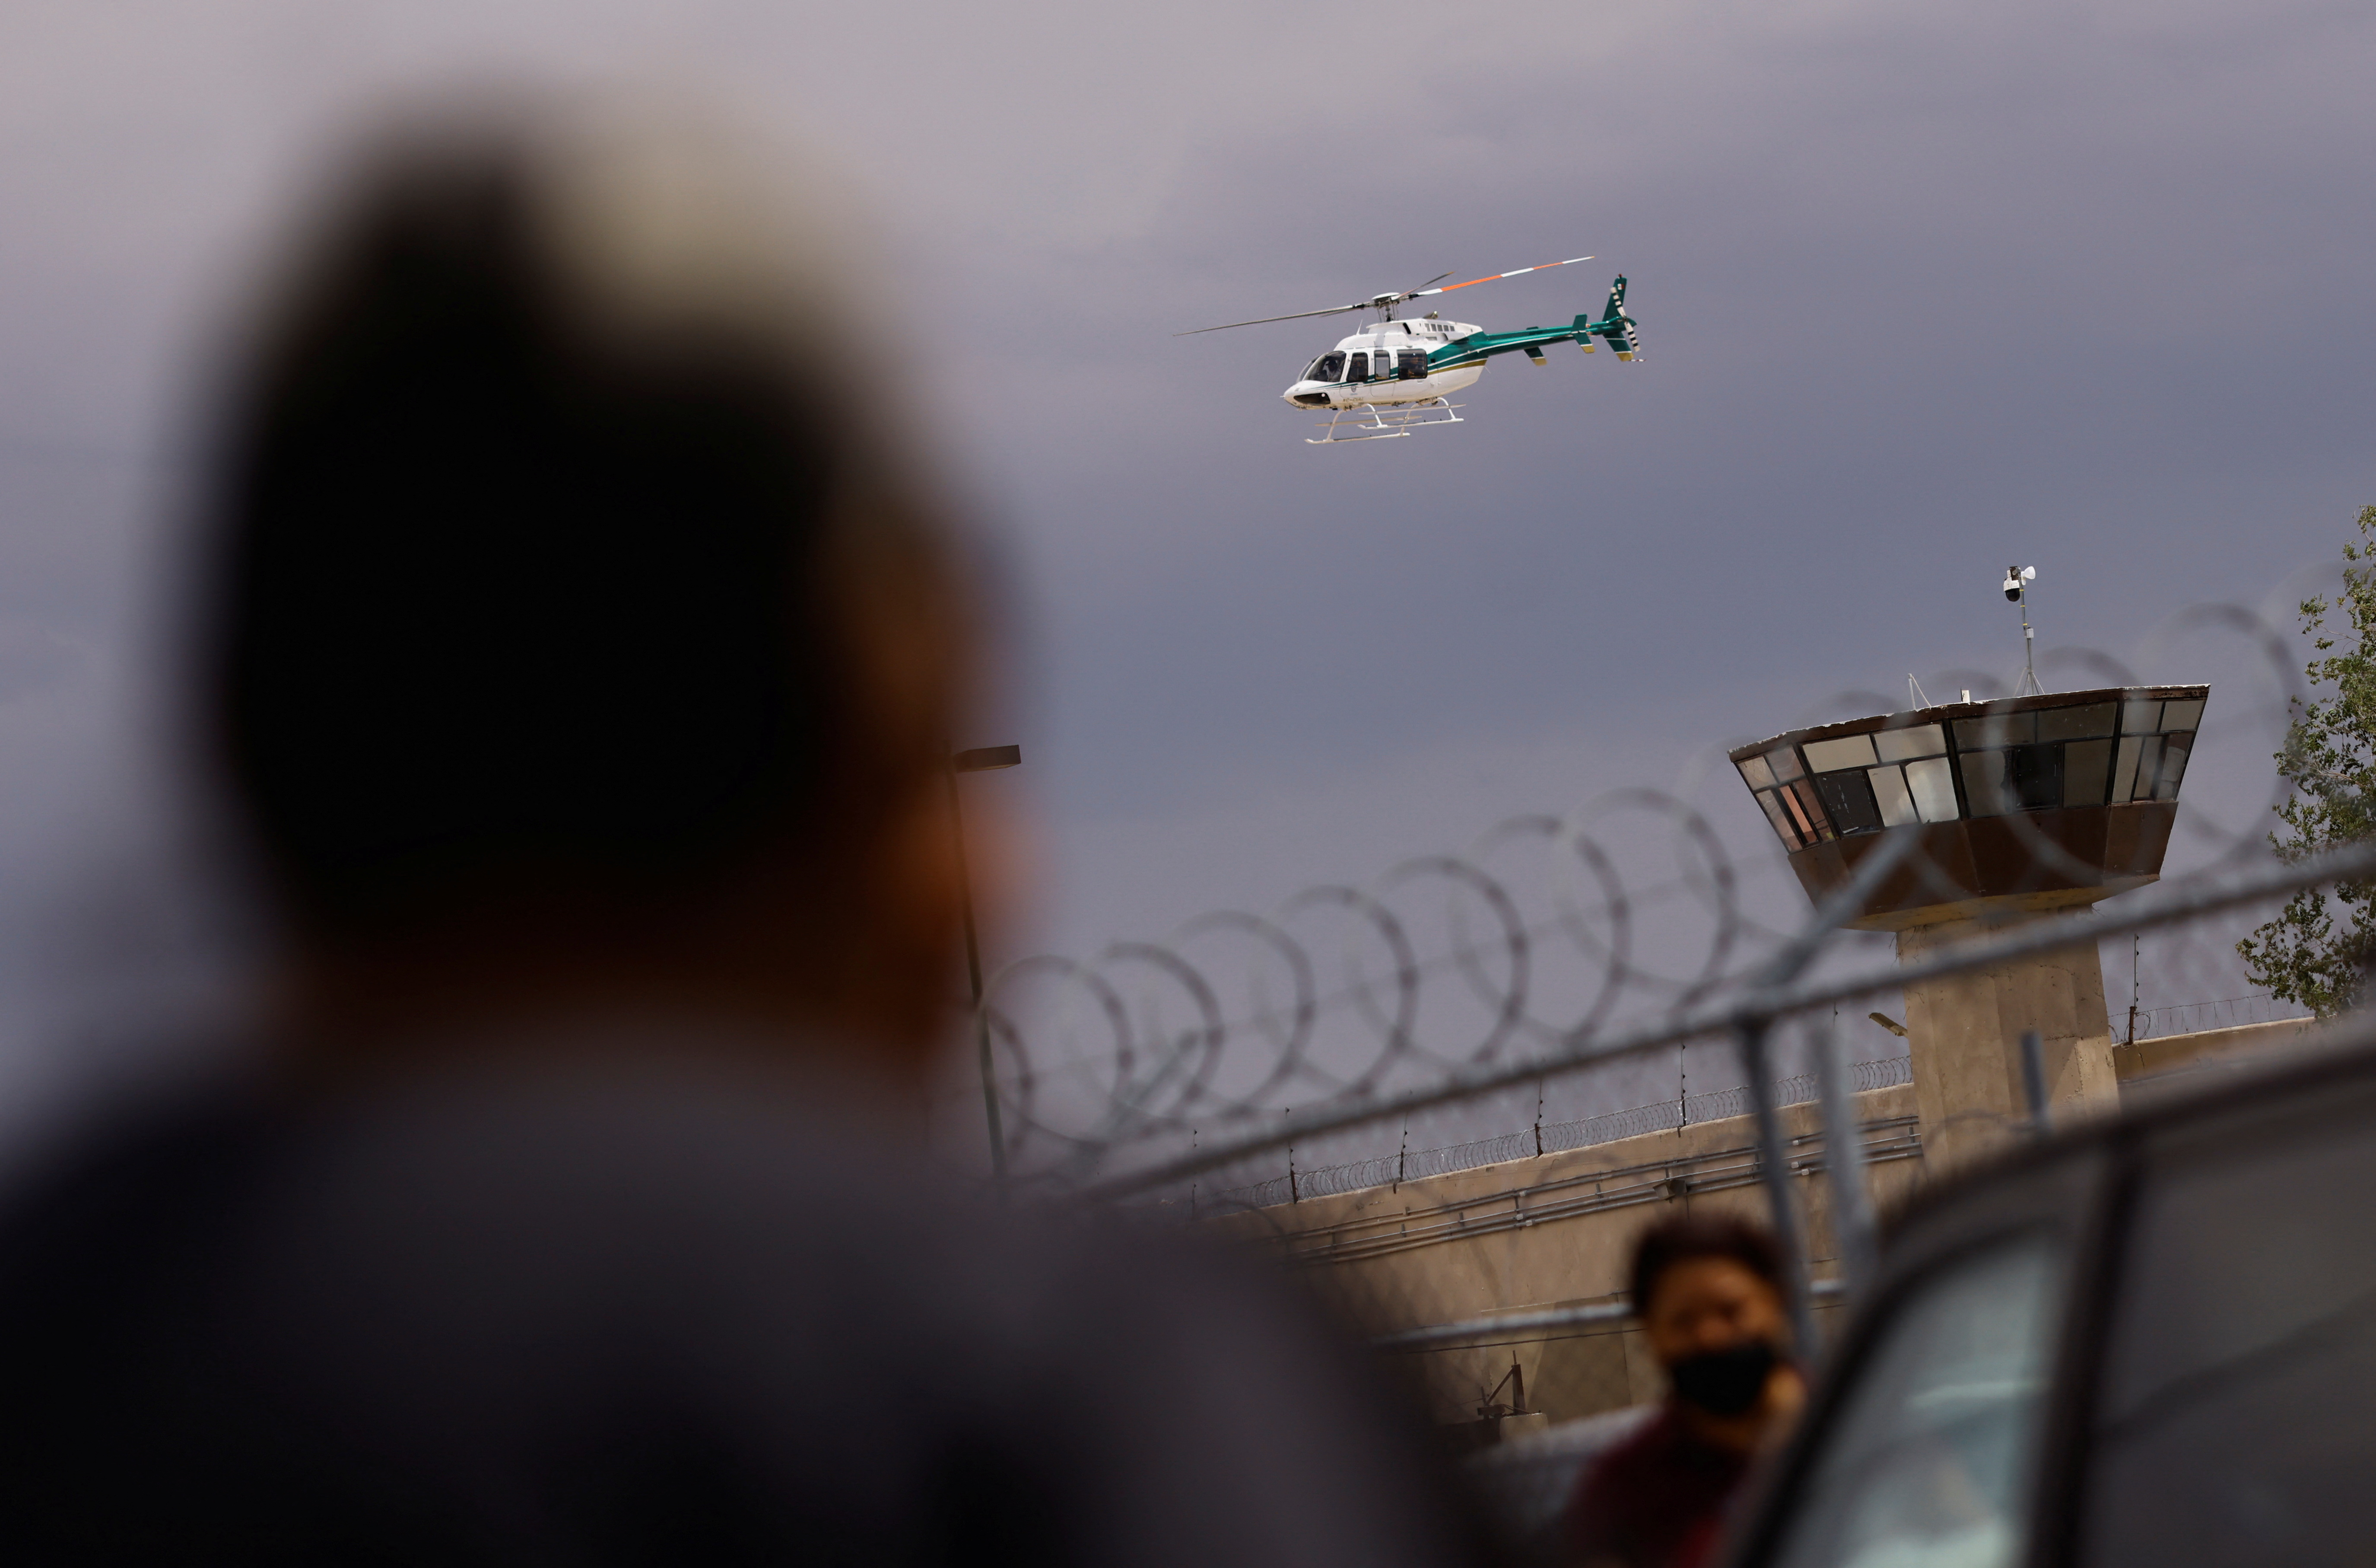 A helicopter helped control the situation at Cereso 3 in Ciudad Juárez (Photo: REUTERS/Jose Luis Gonzalez)